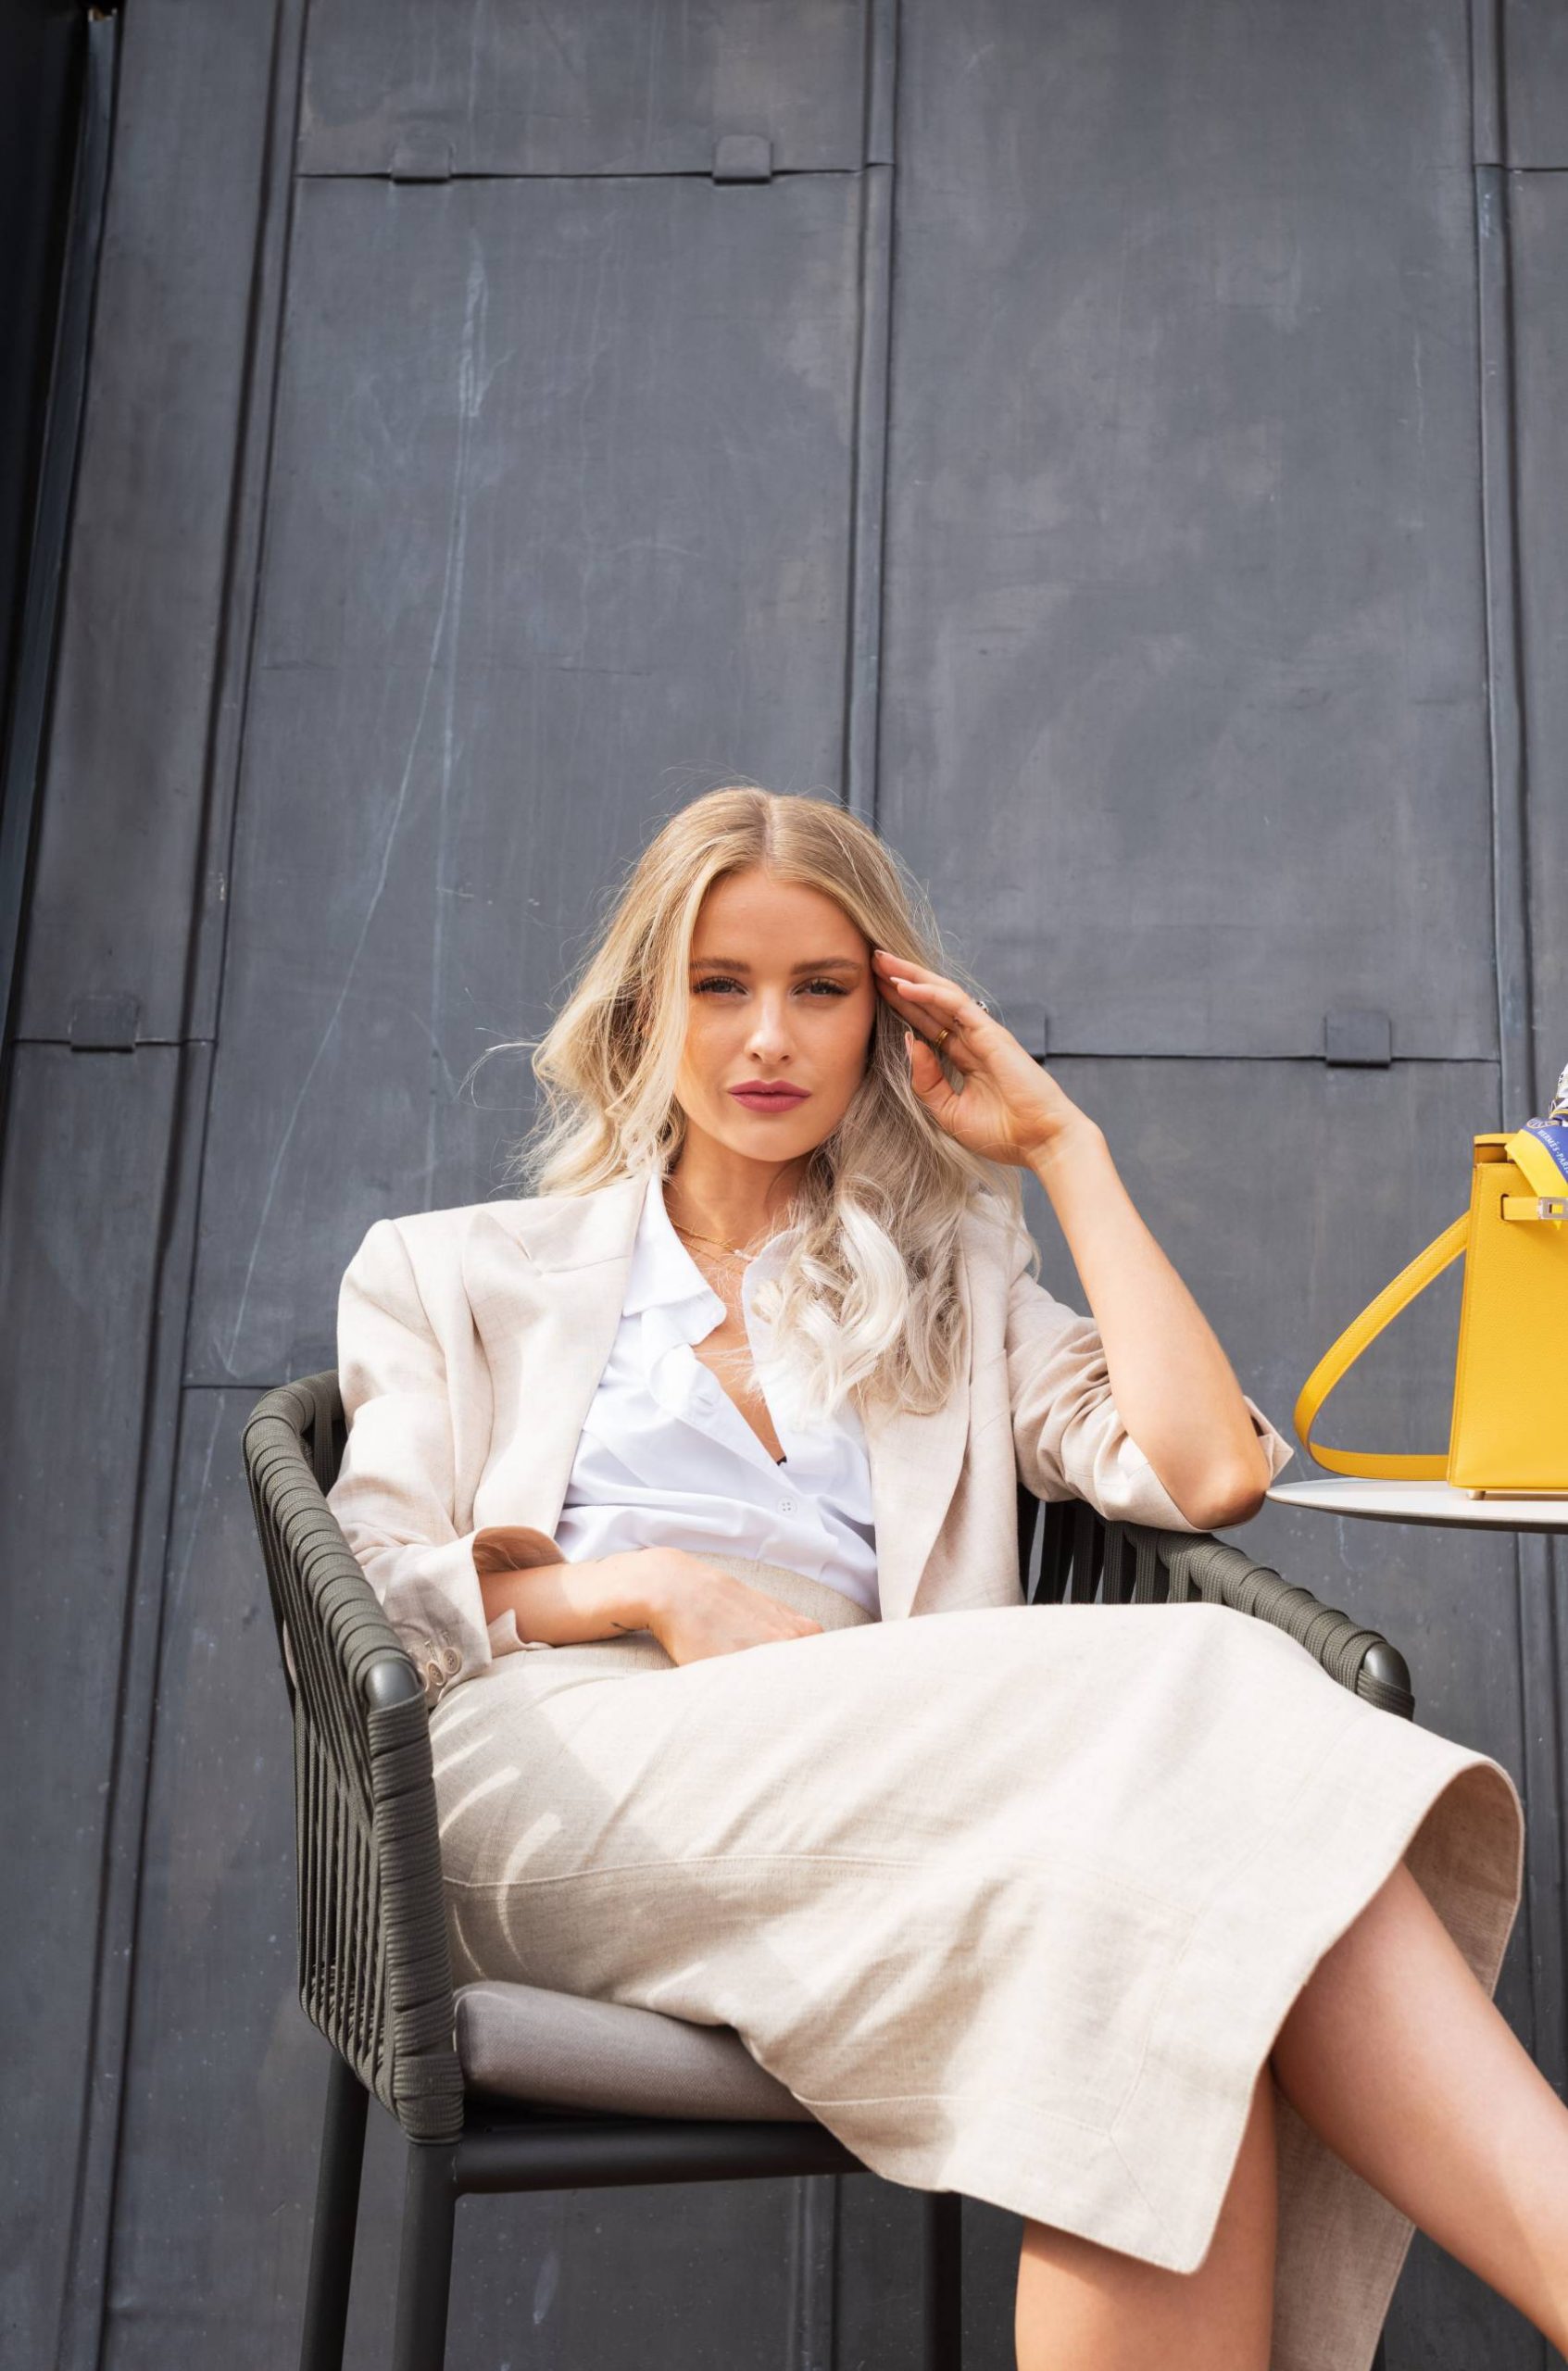 So That Was The First Half of 2021... - Inthefrow